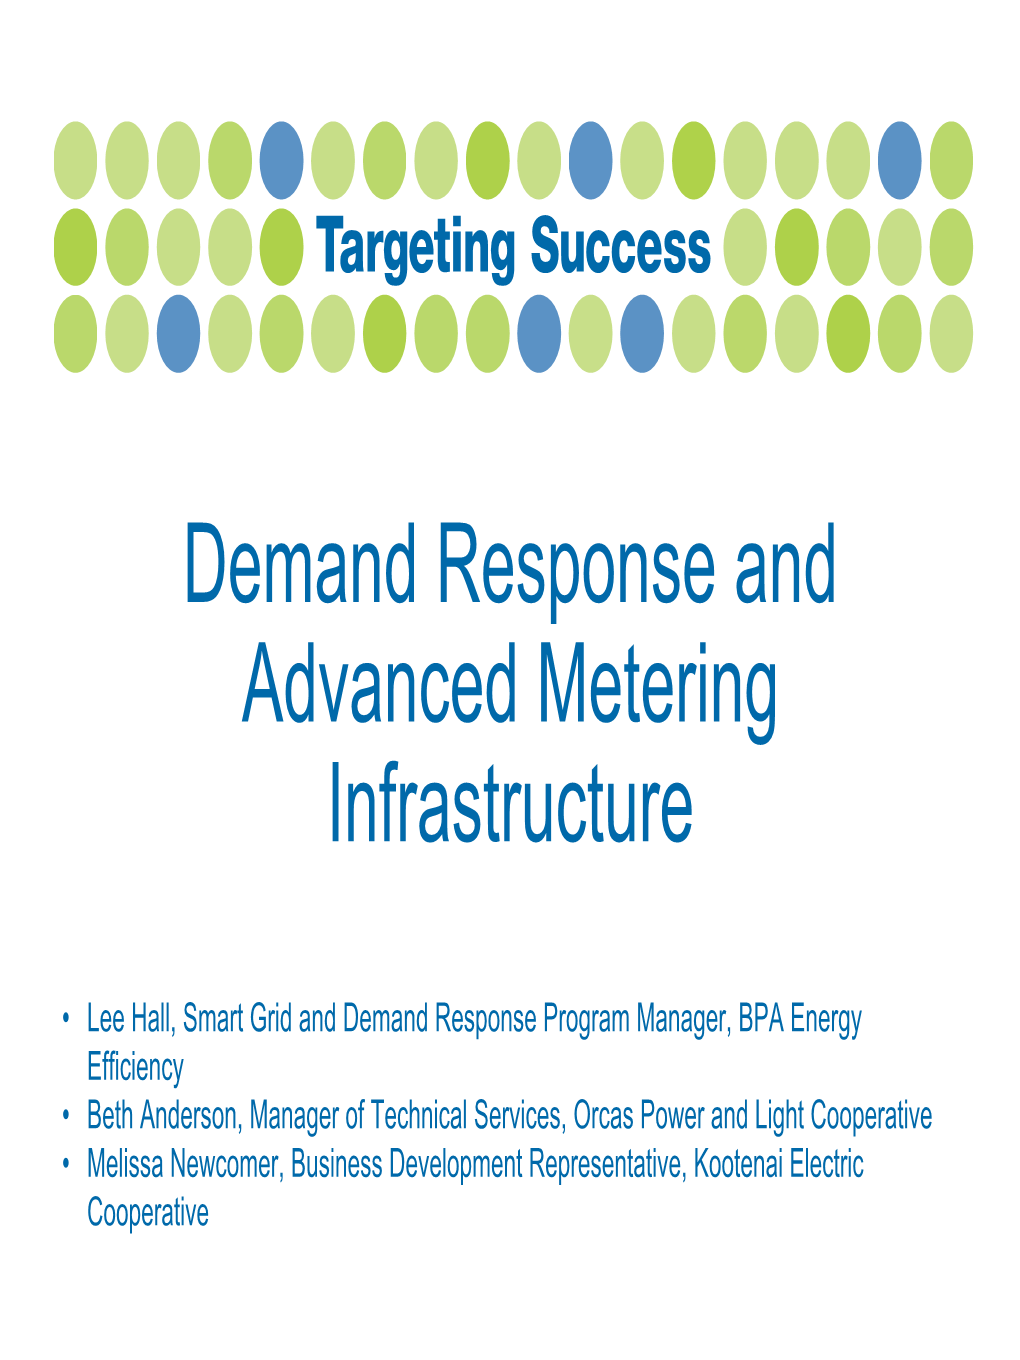 Demand Response and Advanced Metering Infrastructure (AMI)